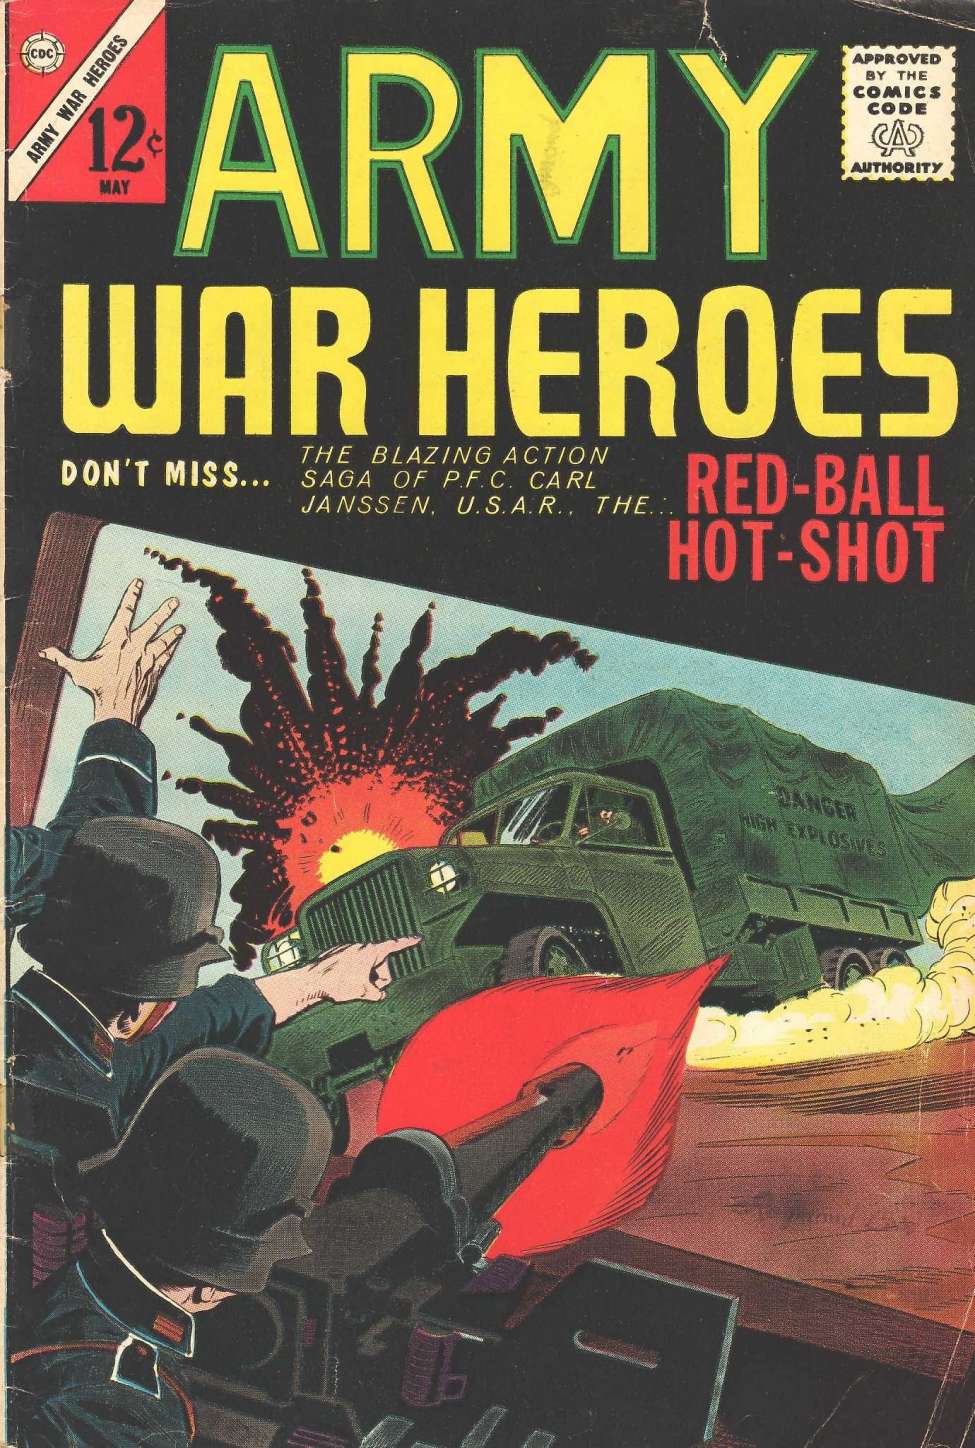 Book Cover For Army War Heroes 3